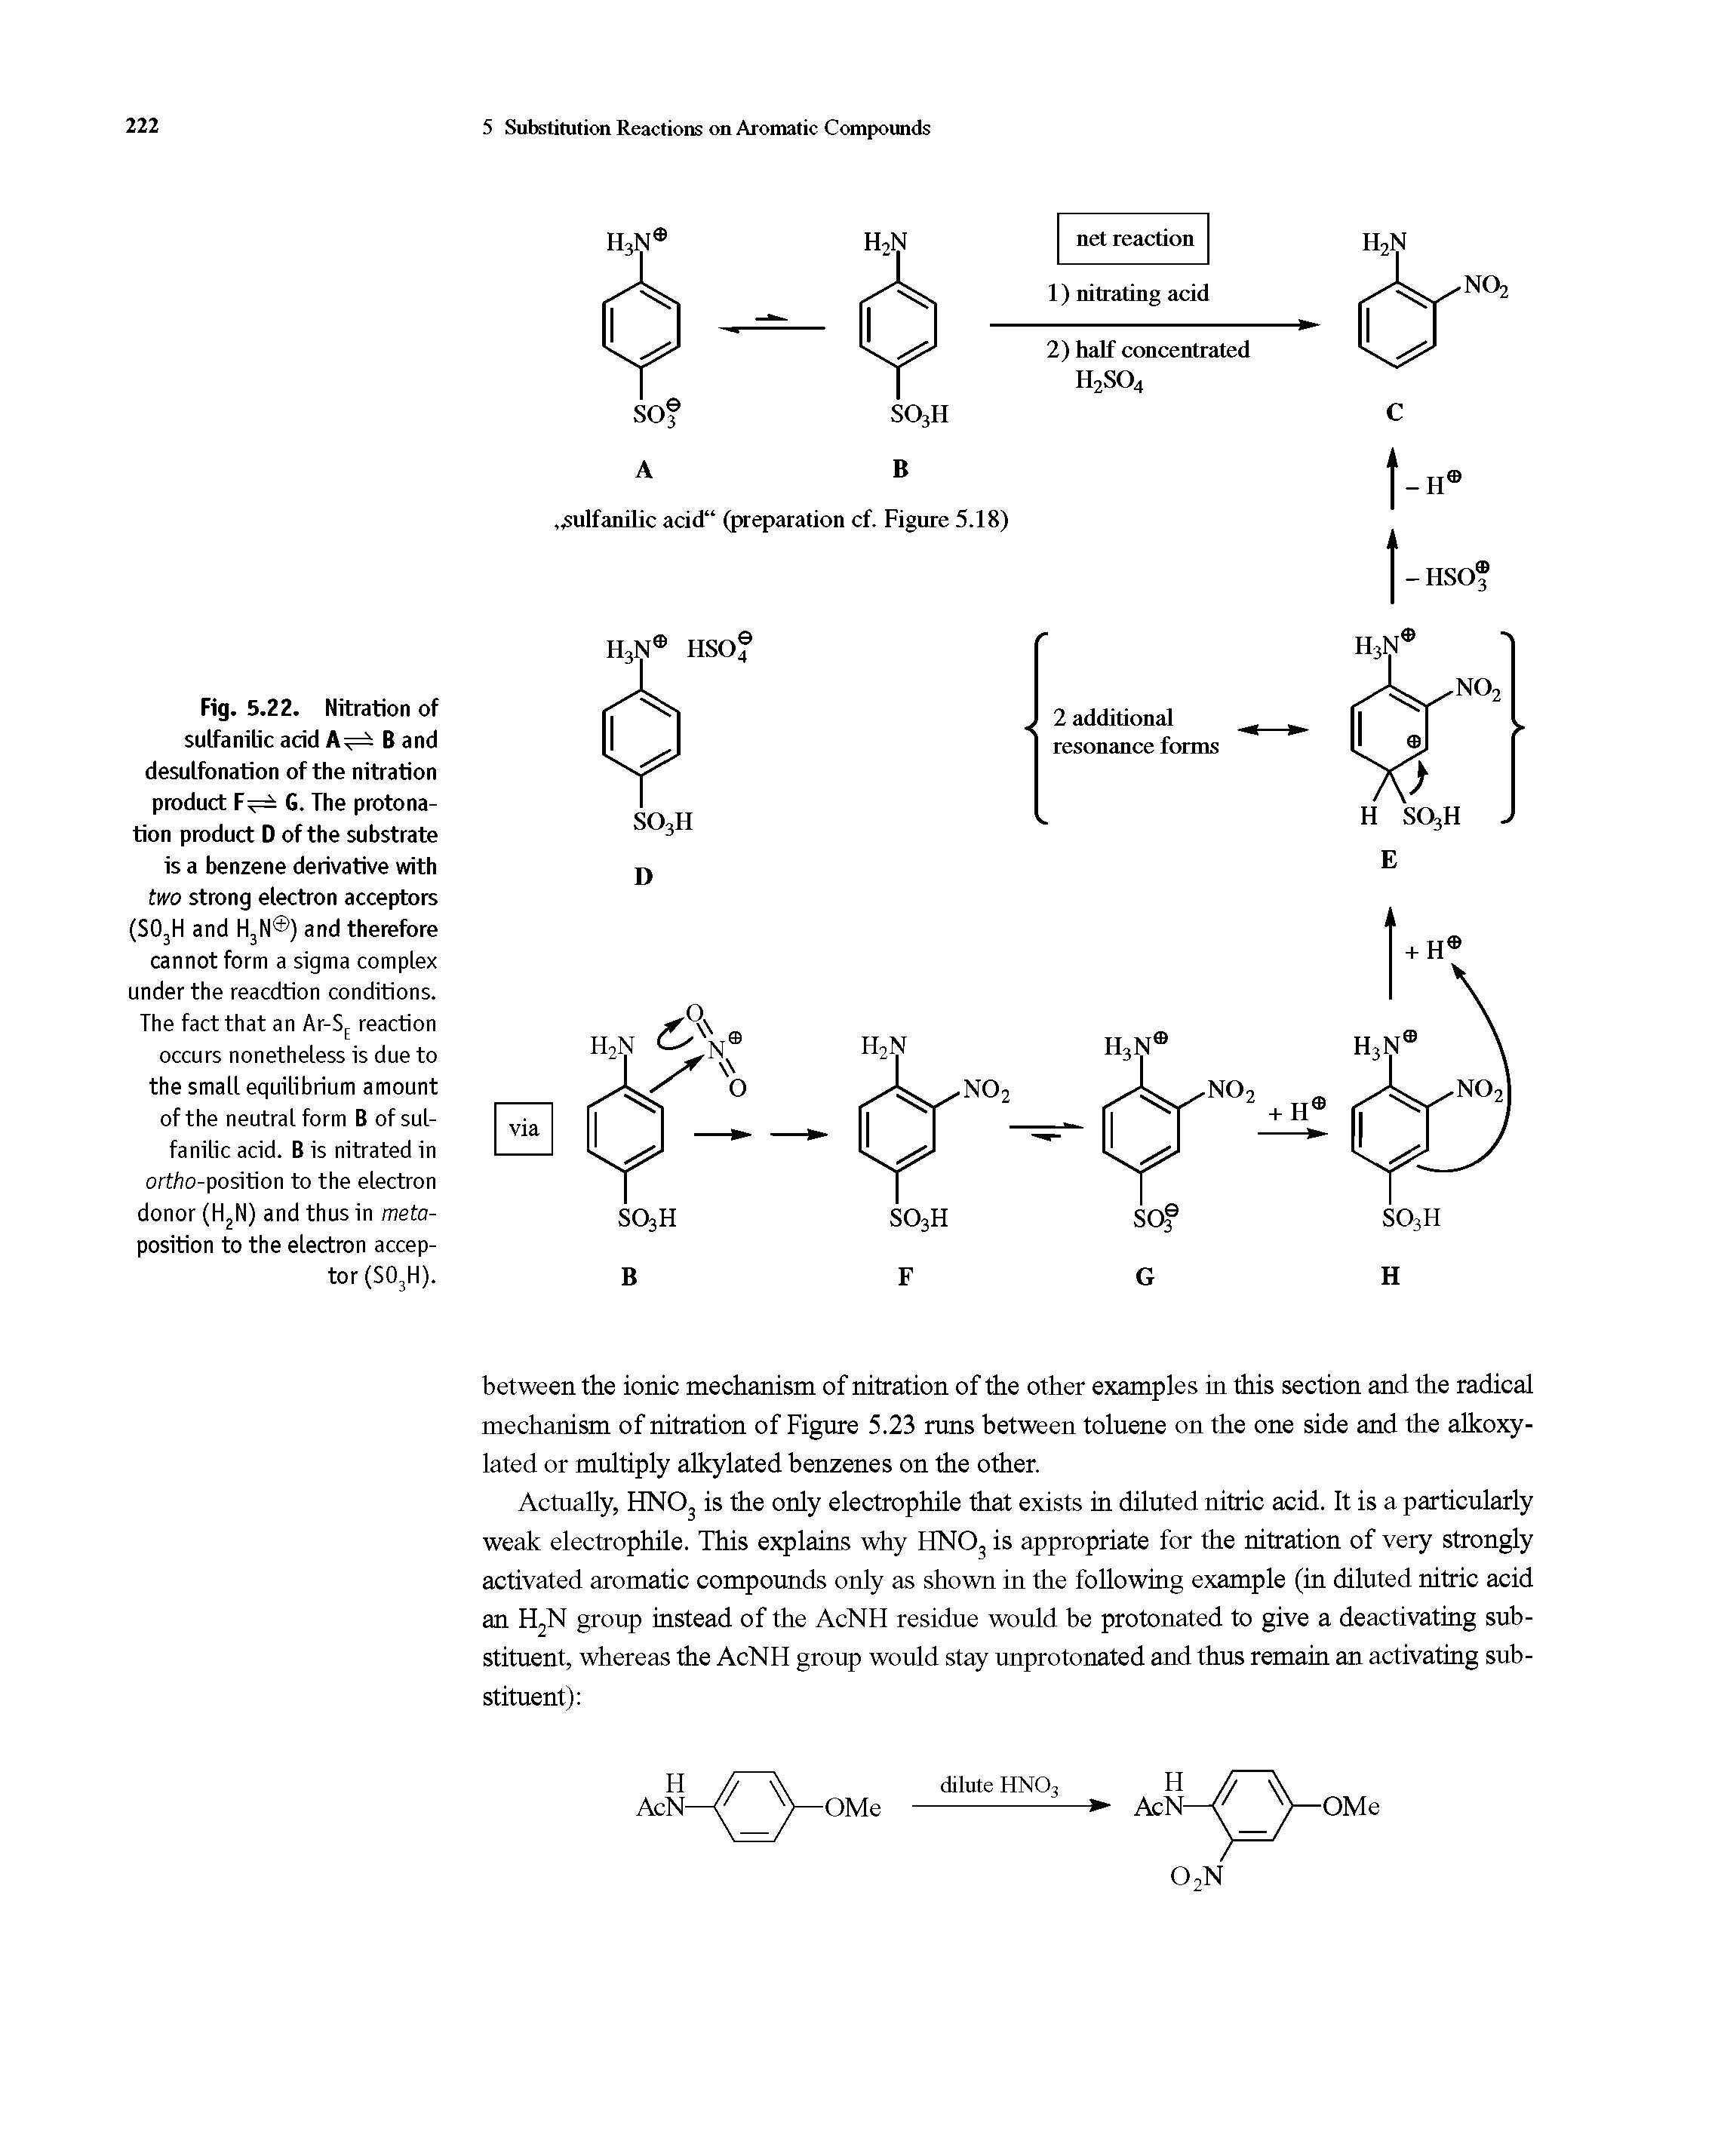 Fig. 5.22. Nitration of sulfanilic acid B and desulfonation of the nitration product G. The protonation product D of the substrate is a benzene derivative with two strong electron acceptors (S03H and H3N ) and therefore cannot form a sigma complex under the reacdtion conditions. The fact that an Ar-SE reaction occurs nonetheless is due to the small equilibrium amount of the neutral form B of sulfanilic acid. B is nitrated in ortho-position to the electron donor (H2N) and thus in meta-position to the electron acceptor (S03H).